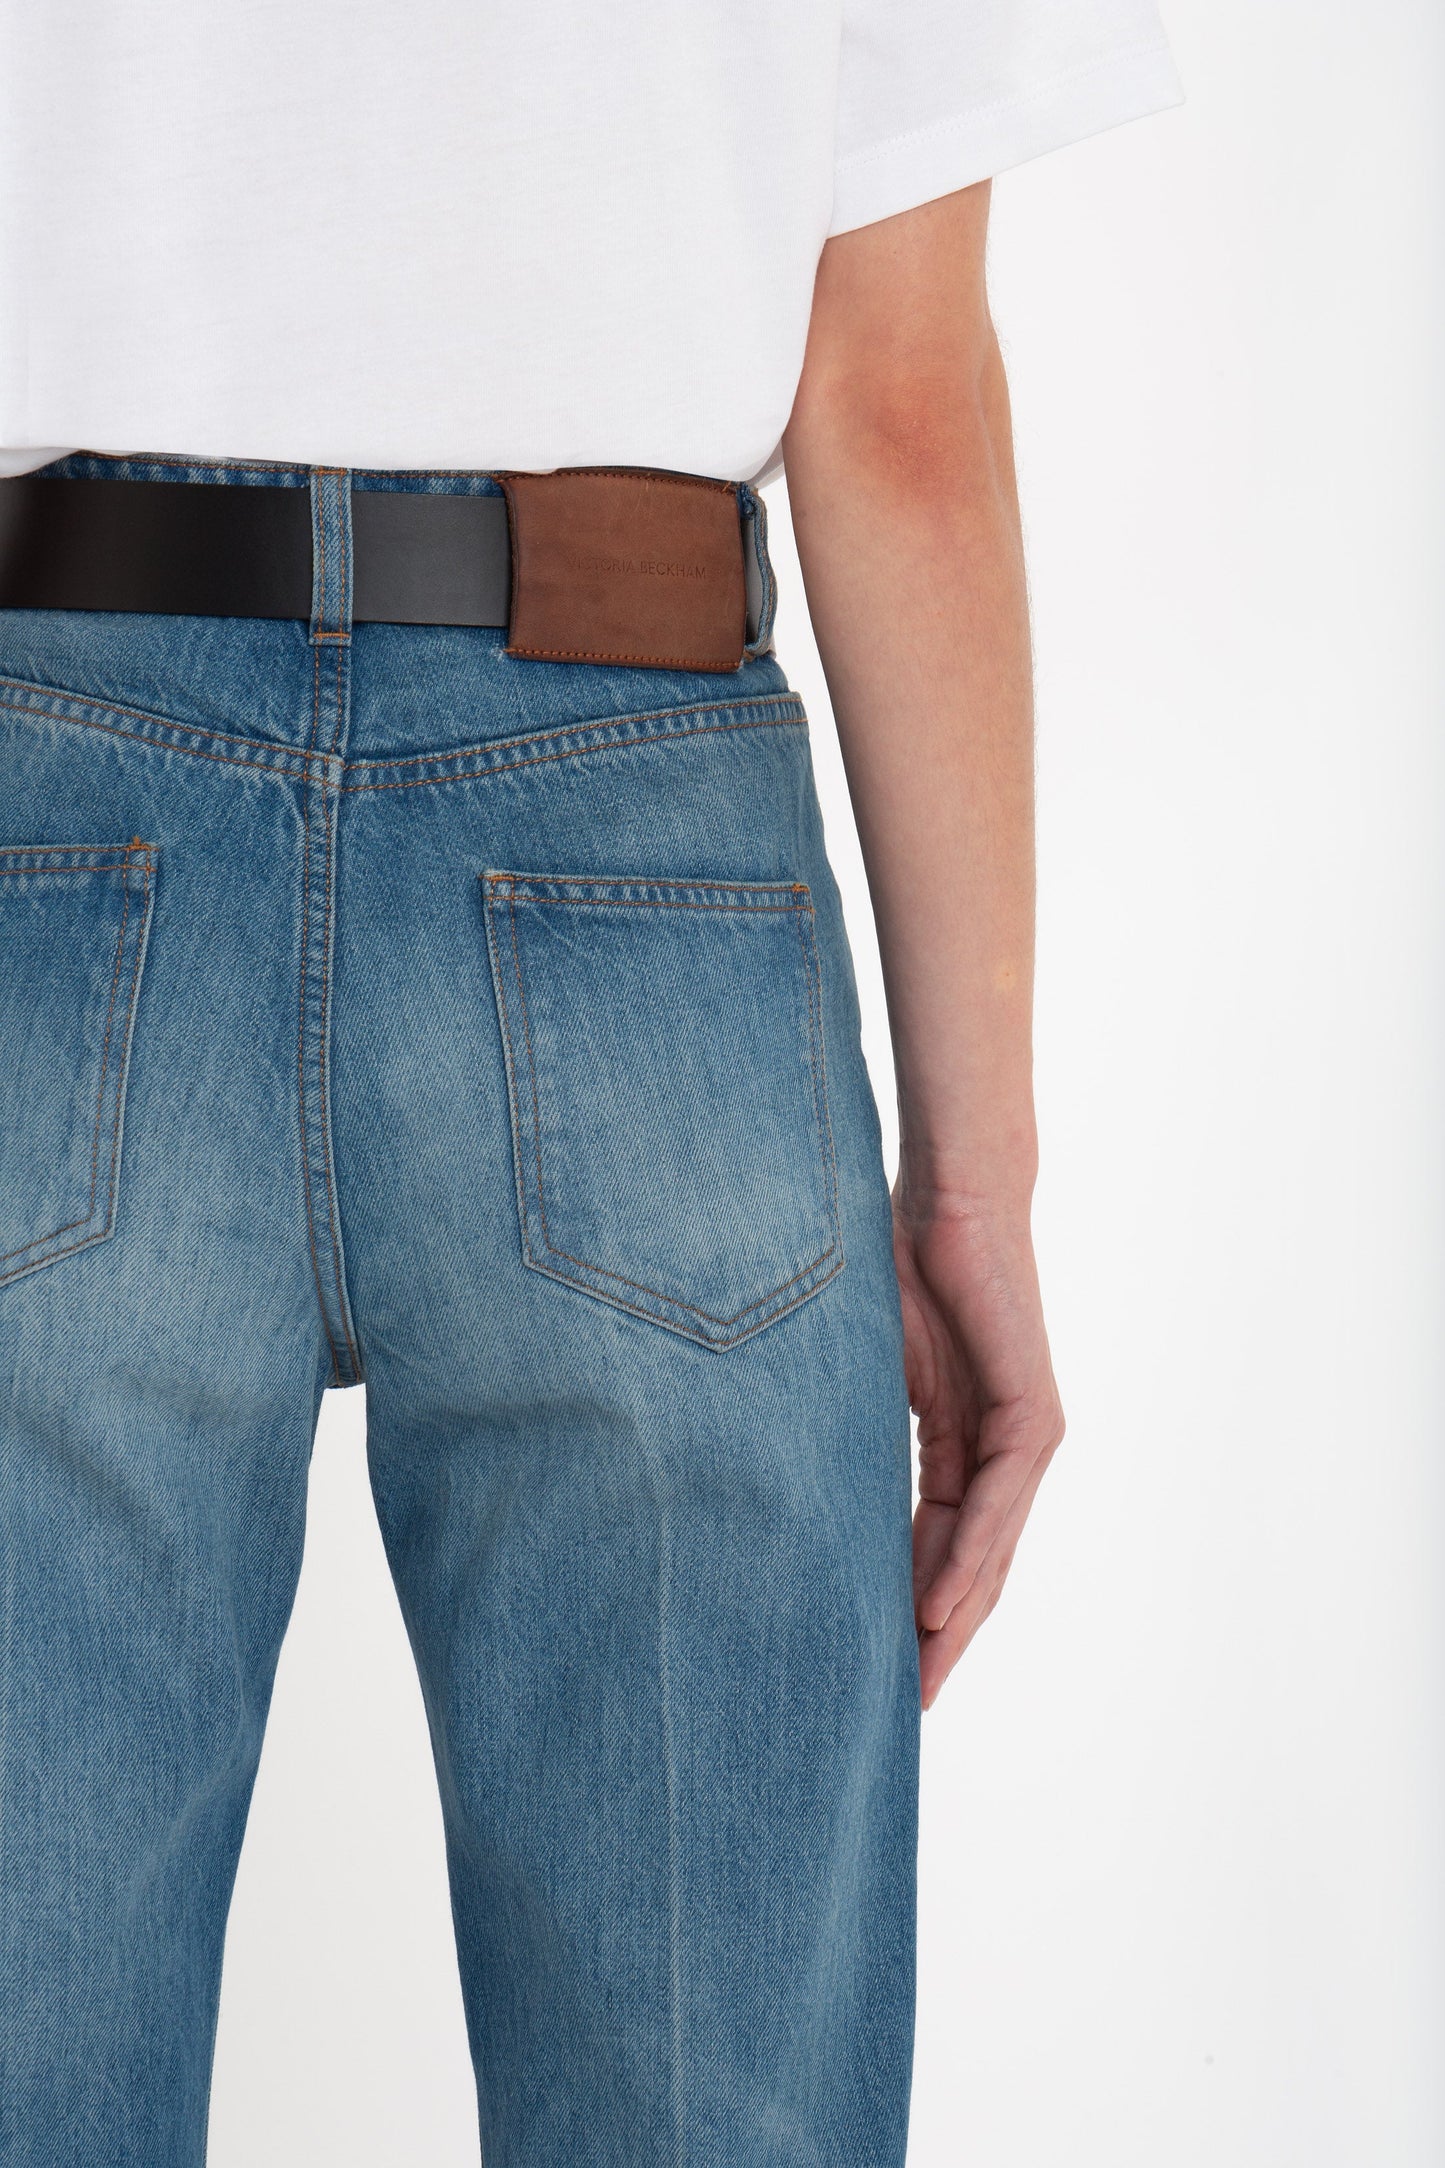 Back view of a person wearing a white t-shirt and blue jeans with a brown belt; their right arm is relaxed by their side. The high waistline of the 100% cotton Julia Jean In Broken Vintage Wash by Victoria Beckham adds a stylish touch to the outfit.